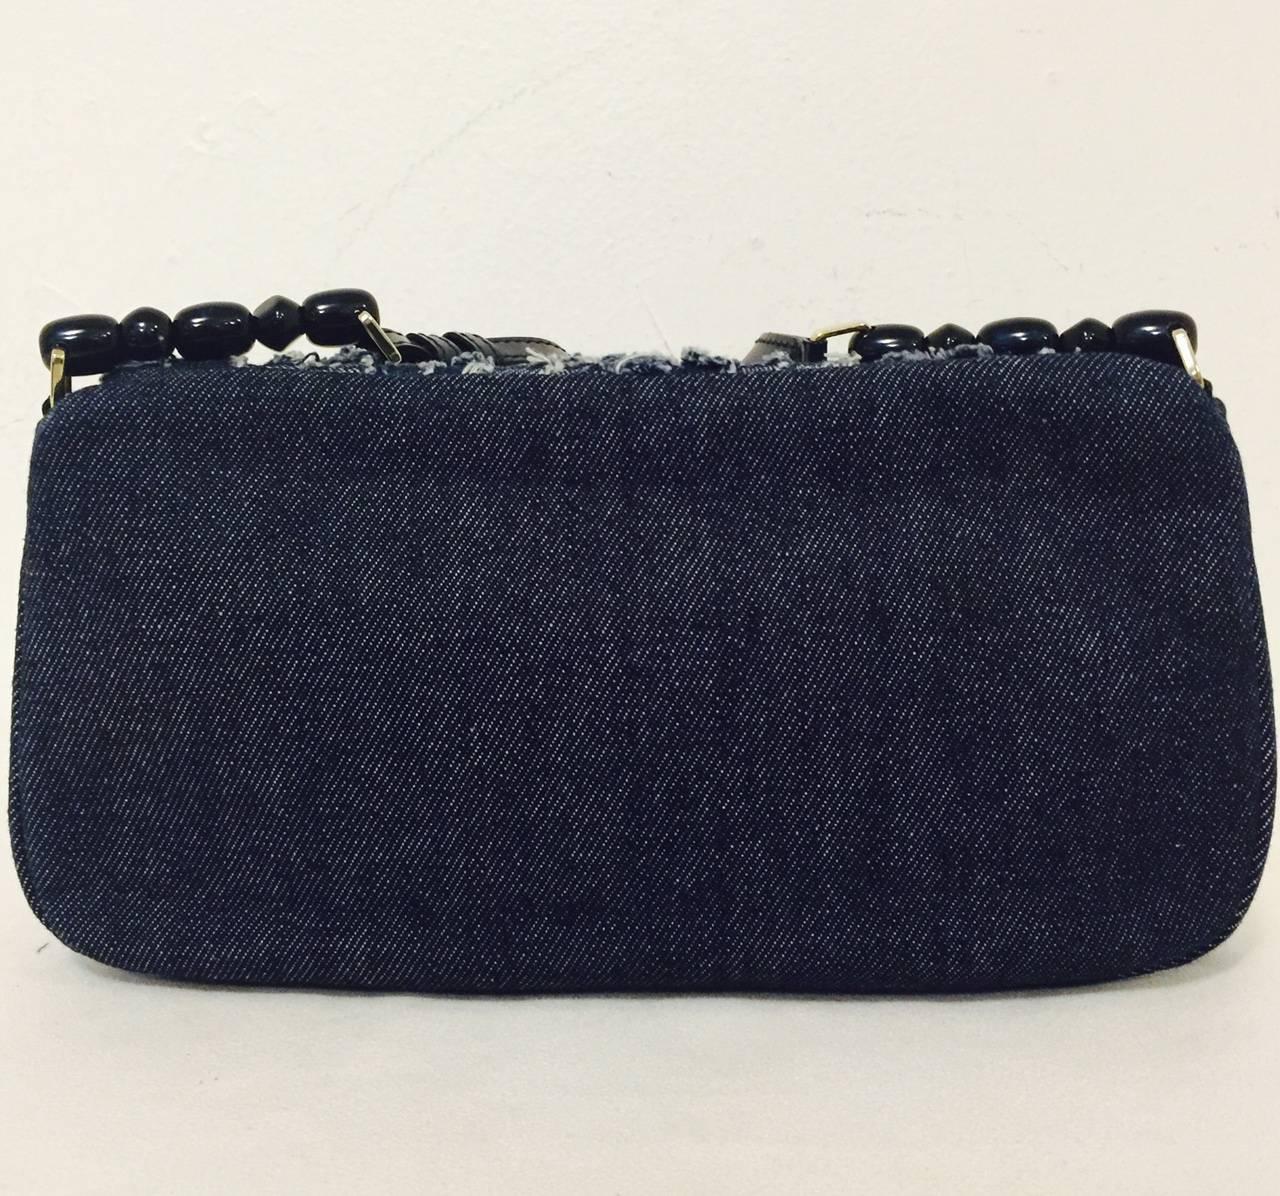 Christian Dior Patch Denim Malice Shoulder Bag With Navy Leather Trim  In Excellent Condition For Sale In Palm Beach, FL